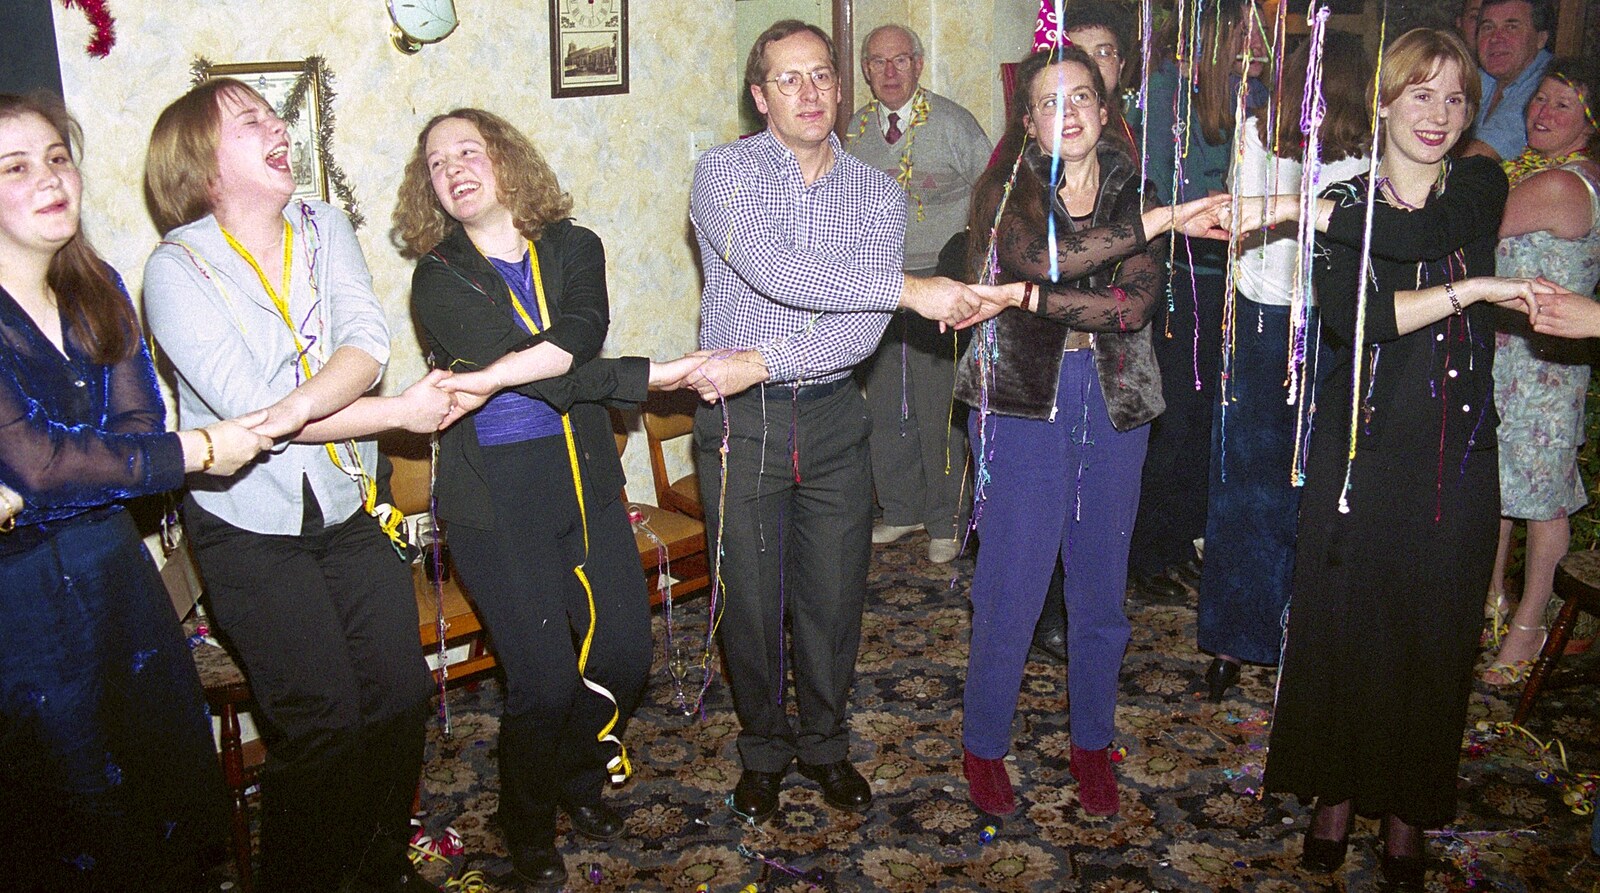 More Auld Lang Syne action from New Year's Eve at The Swan Inn, Brome, Suffolk - 31st December 1999